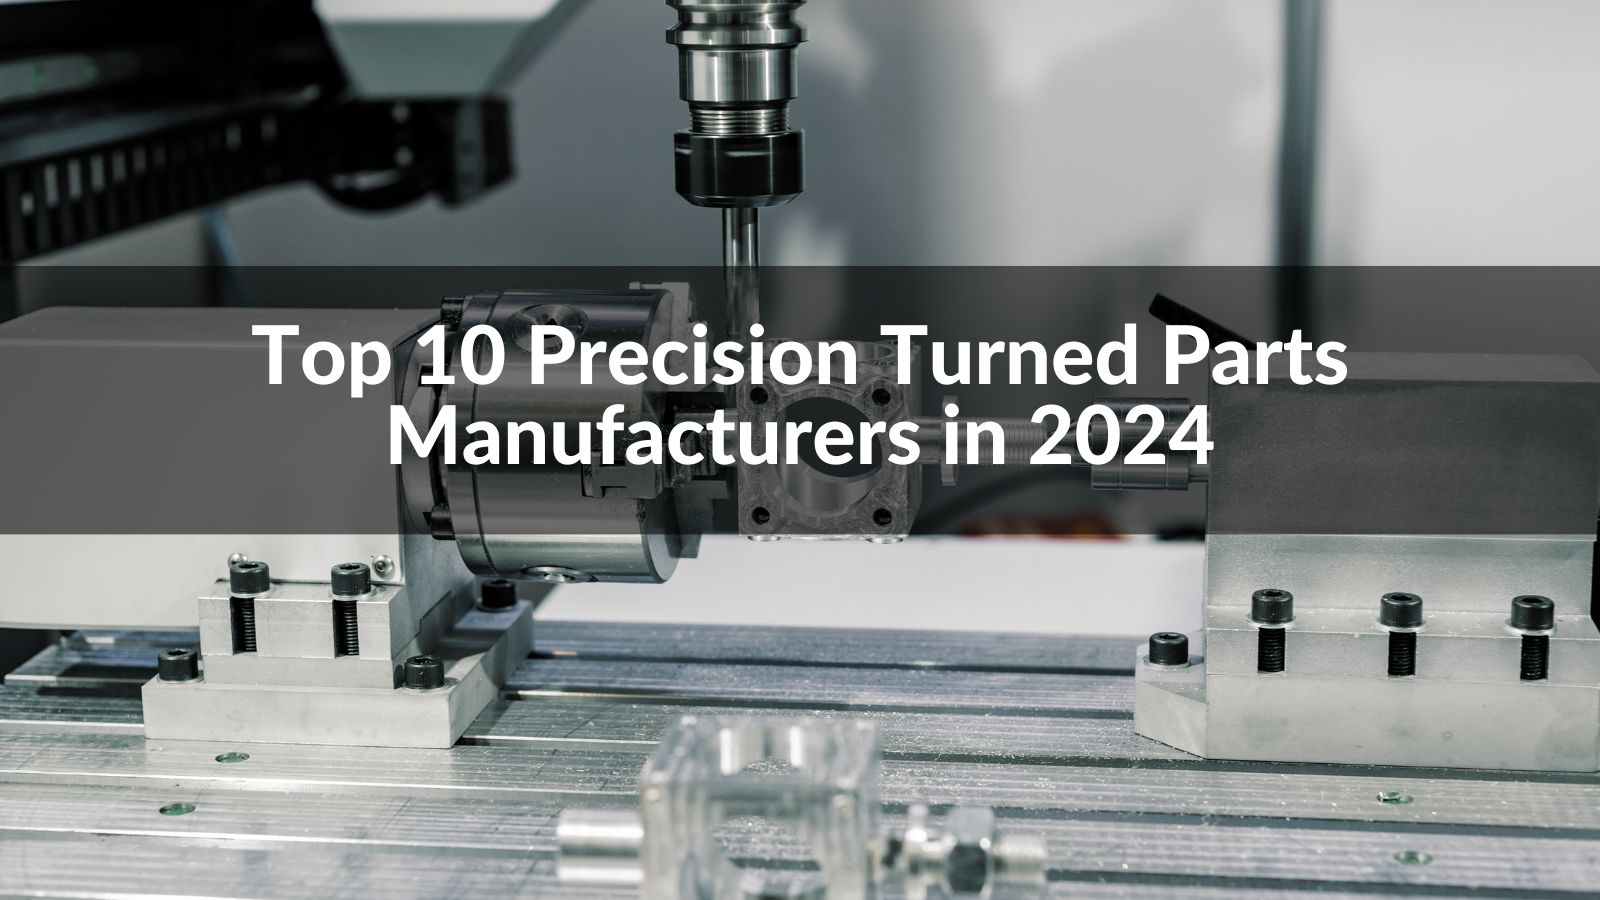 Top 10 Precision Turned Parts Manufacturers in 2024